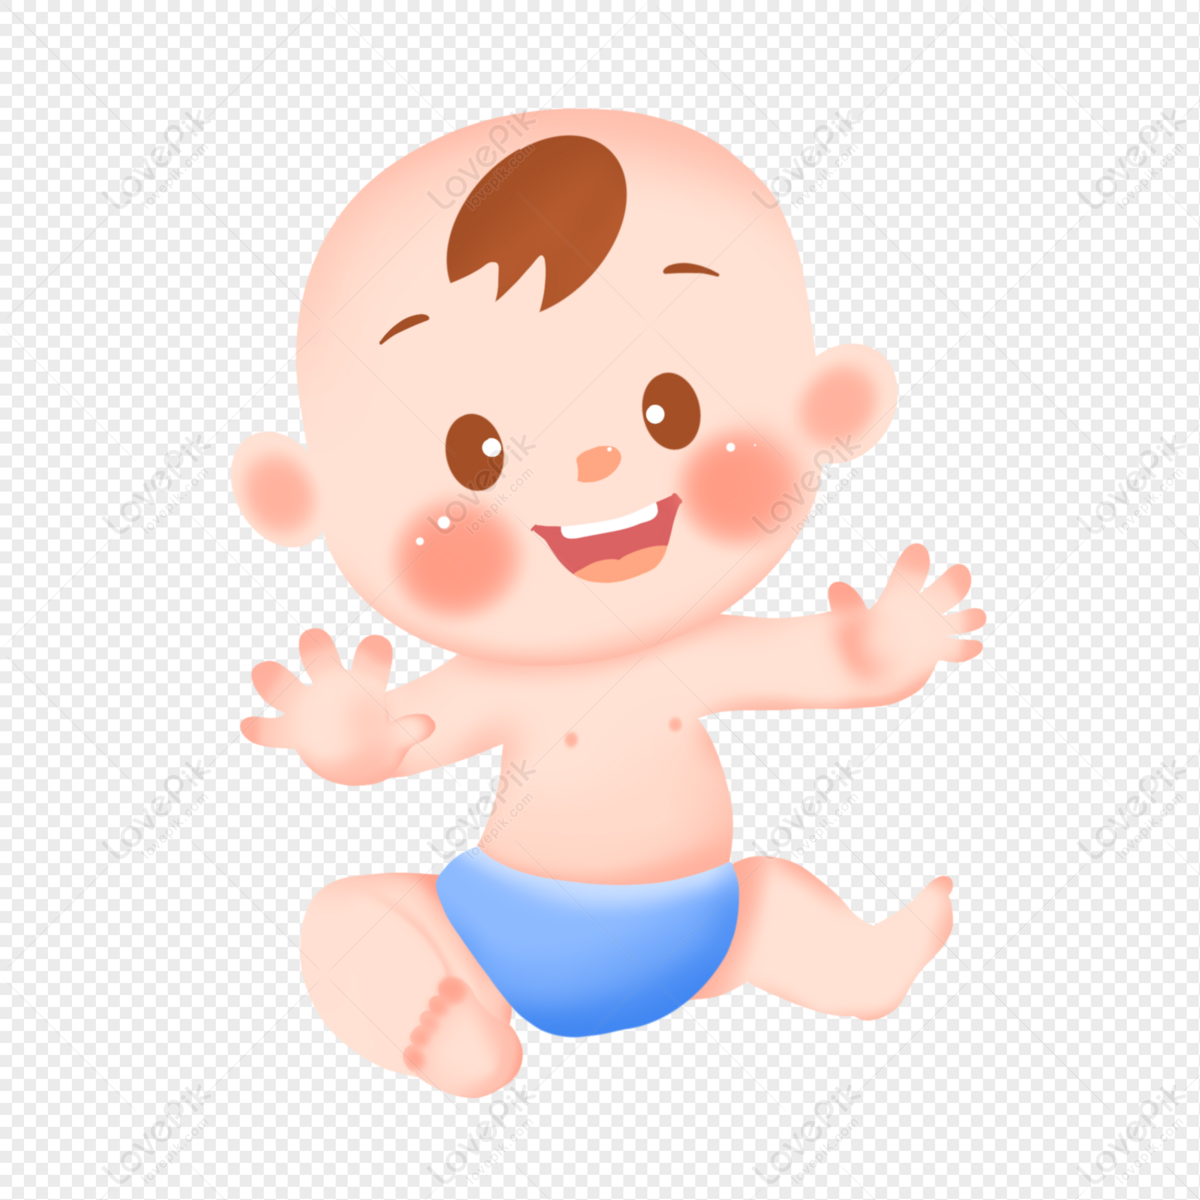 Little baby, small baby, free materials, baby png hd transparent image